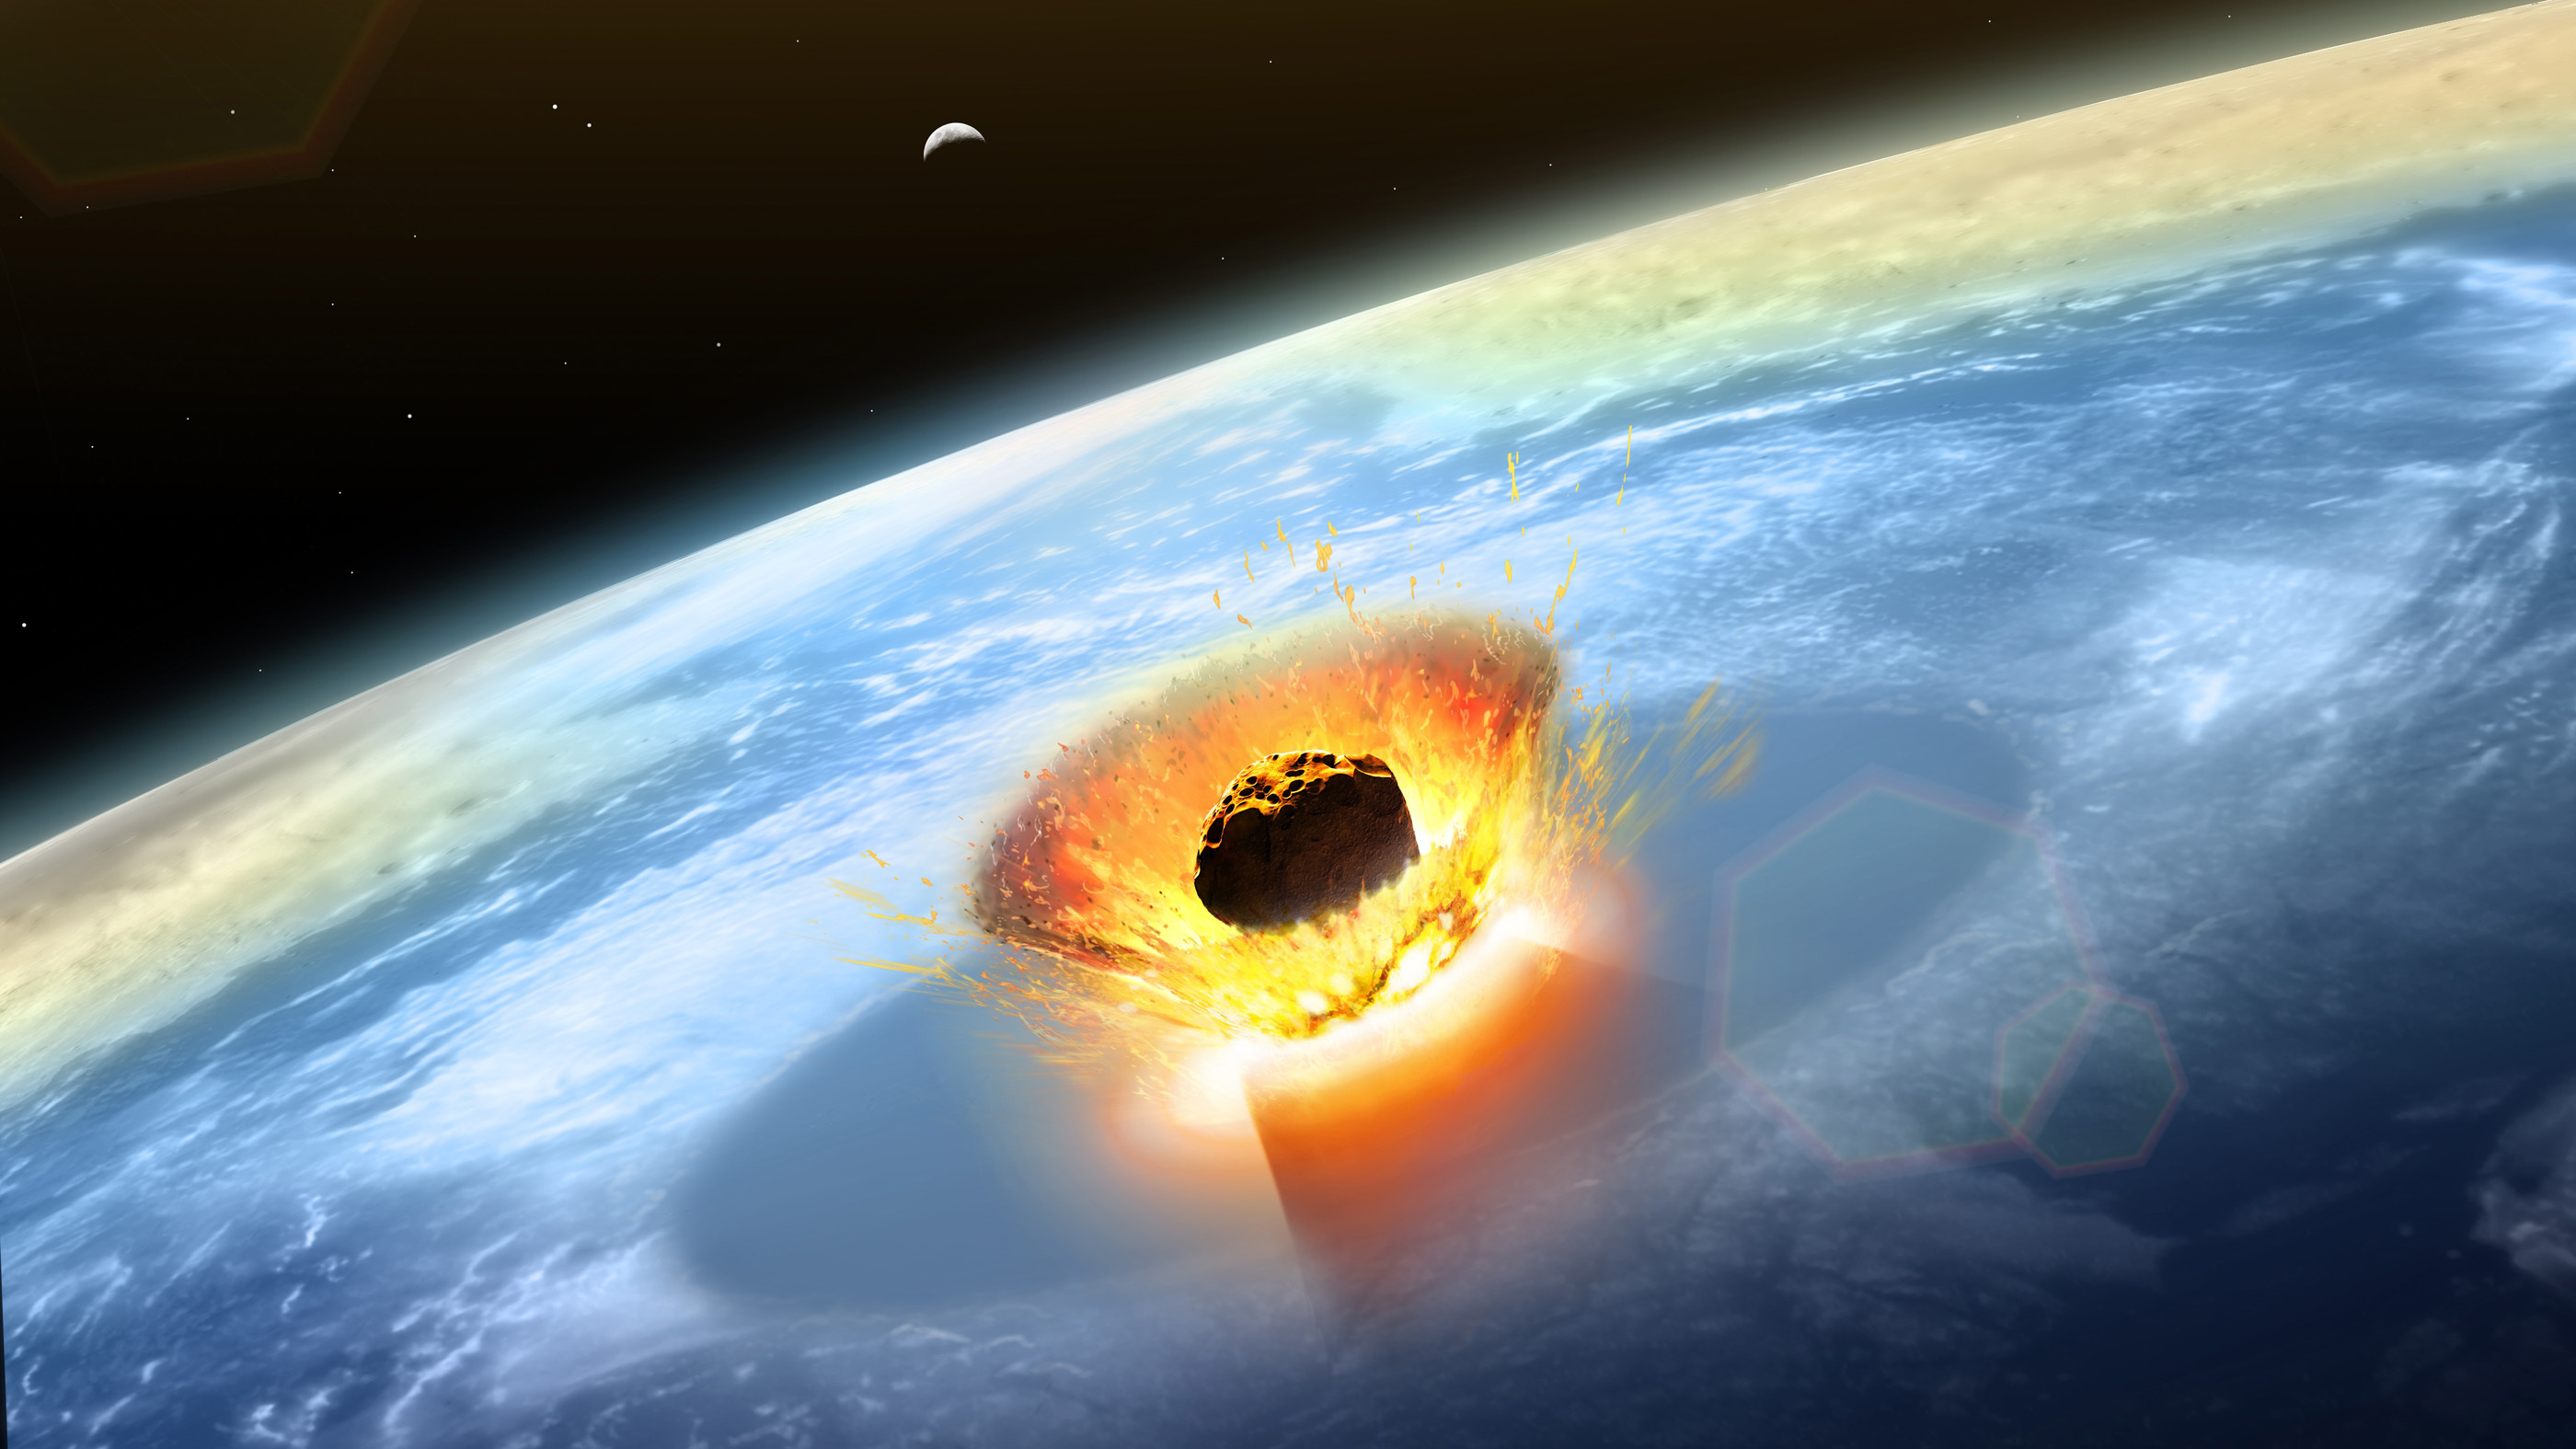 A giant asteroid collided with Earth on the Yucatan Peninsula some 66 million years ago, as shown in this illustration.